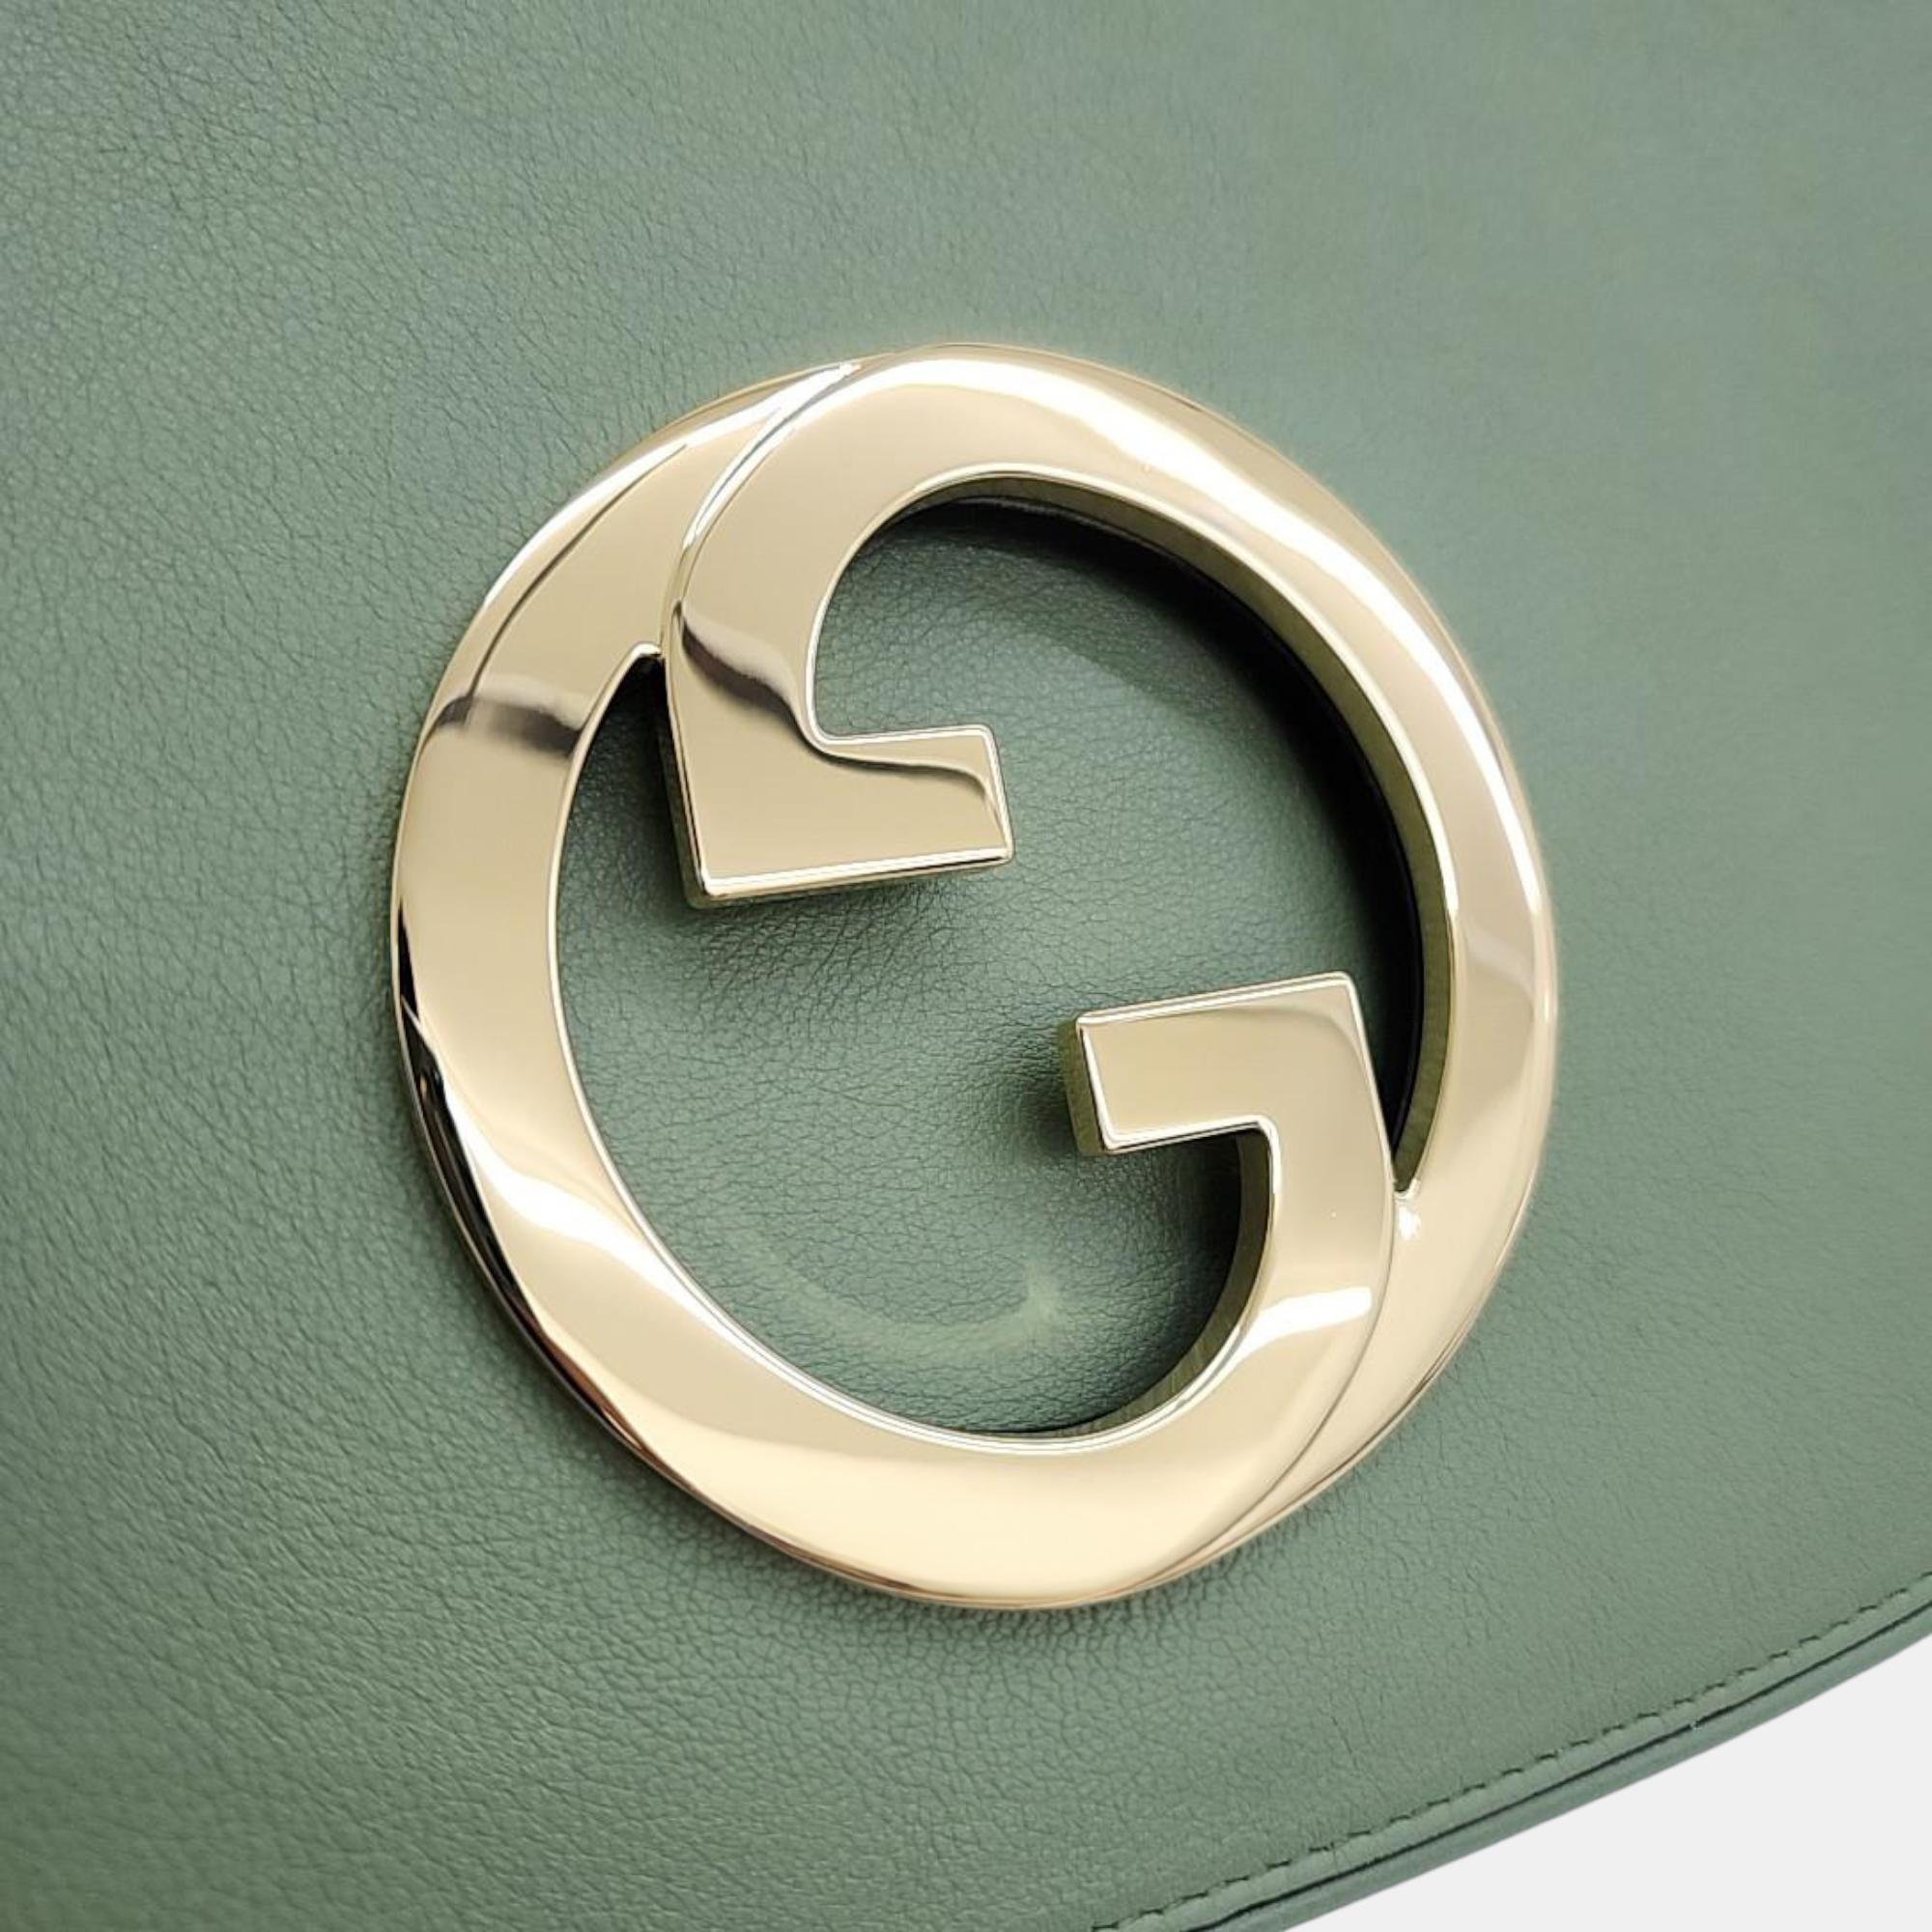 Gucci Light Green Leather Top Handle Blondie Bag (721172)